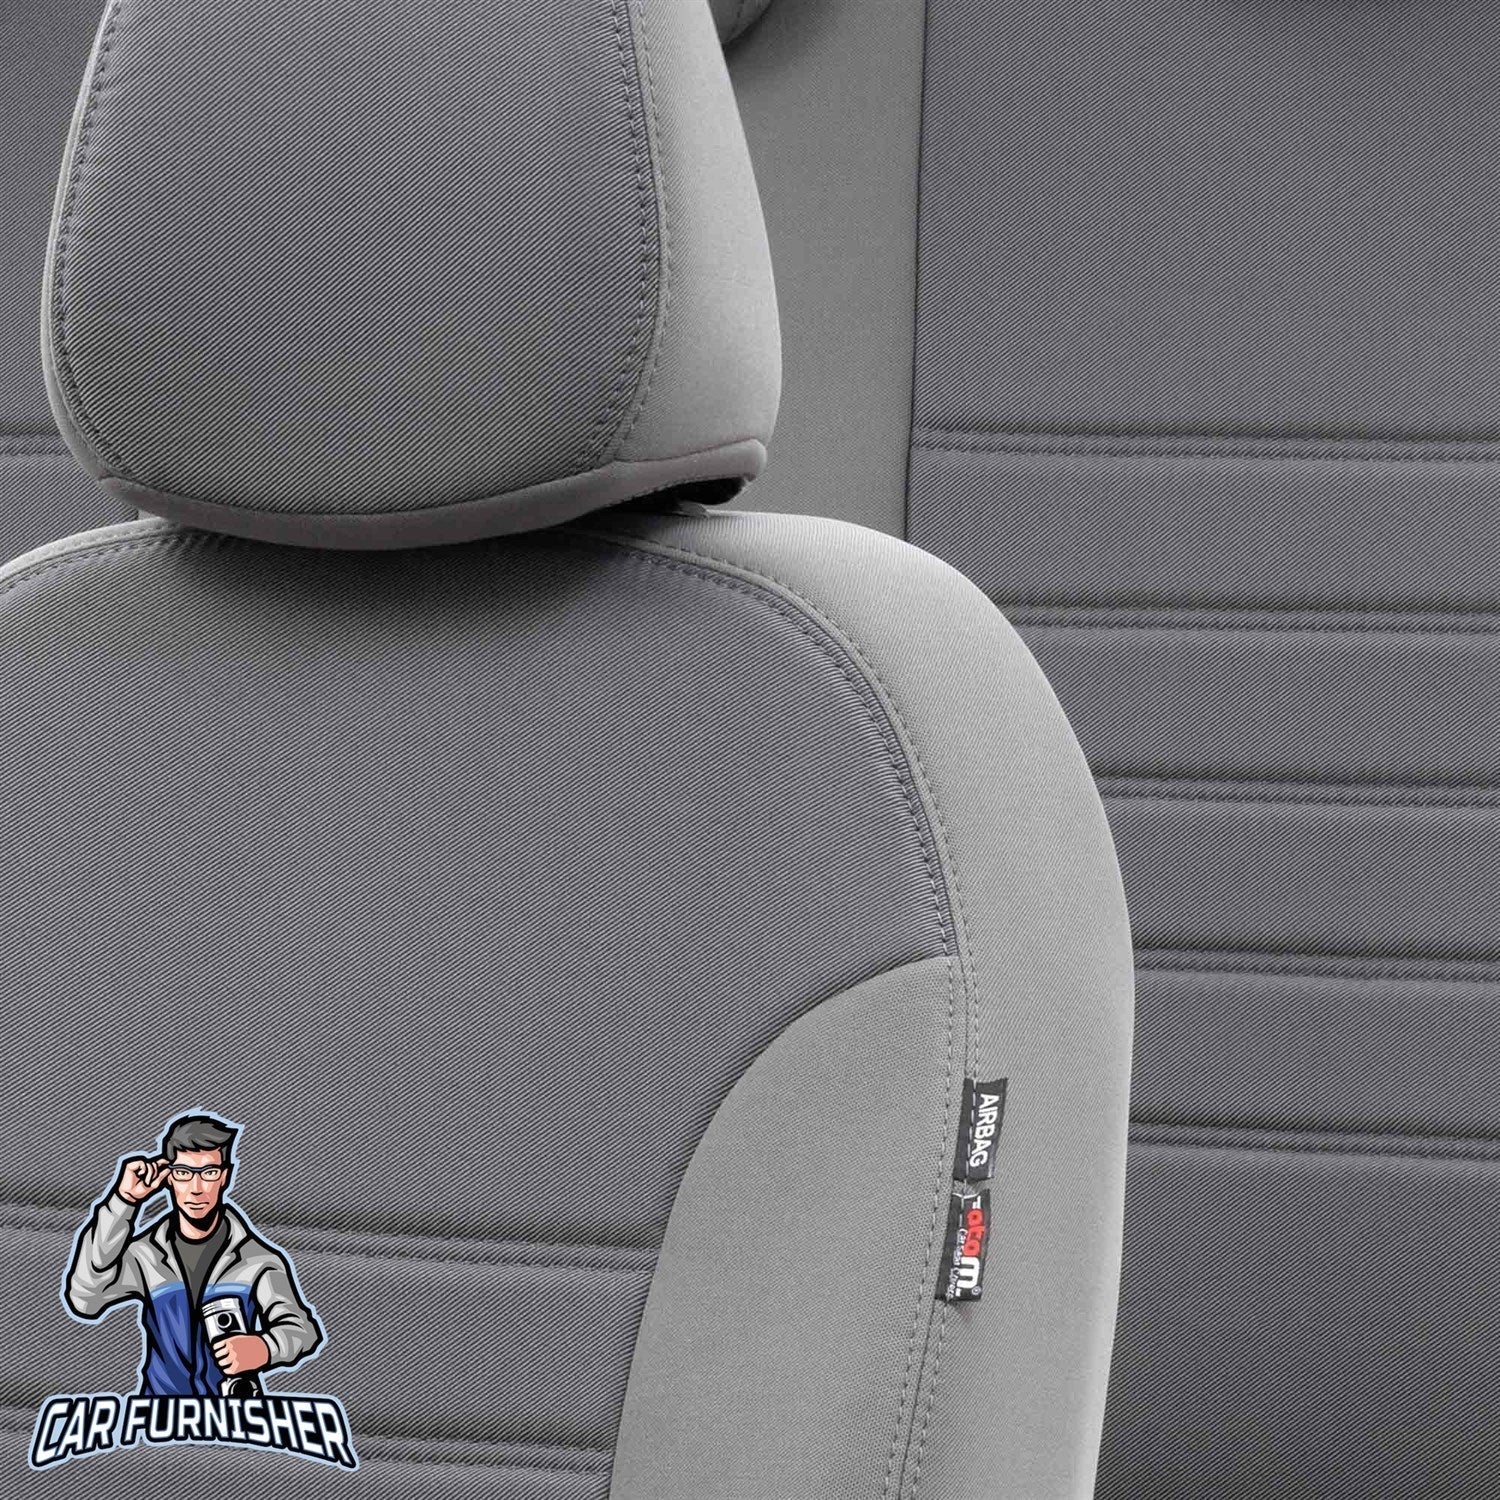 Nissan NV300 Seat Cover New York Leather Design Gray Jacquard Fabric